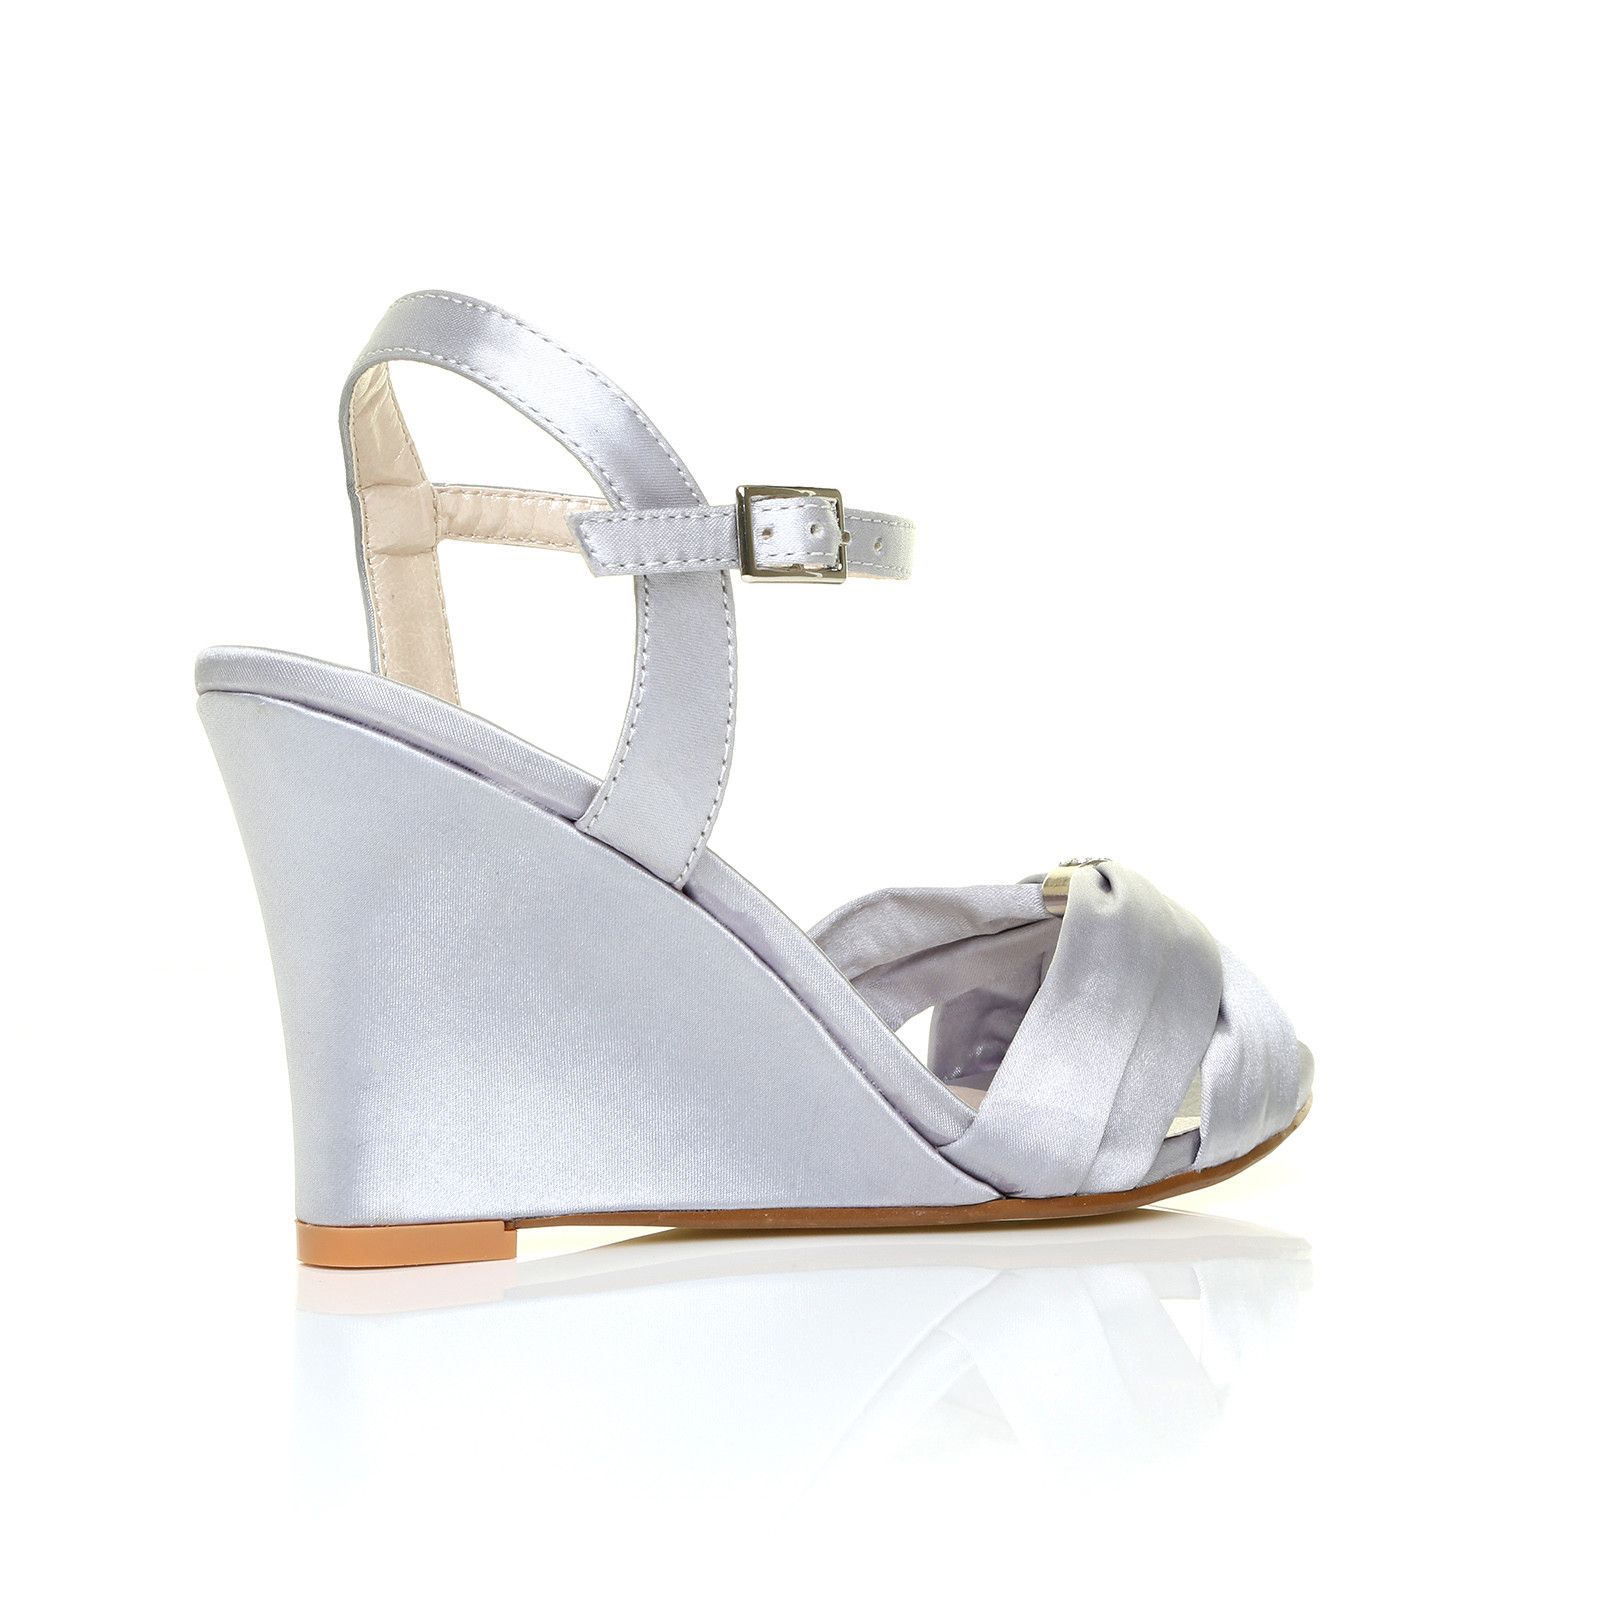 Silver Wedge Shoes For Wedding
 WOMENS BRIDAL WEDDING HIGH WEDGE LADIES IVORY WHITE SILVER